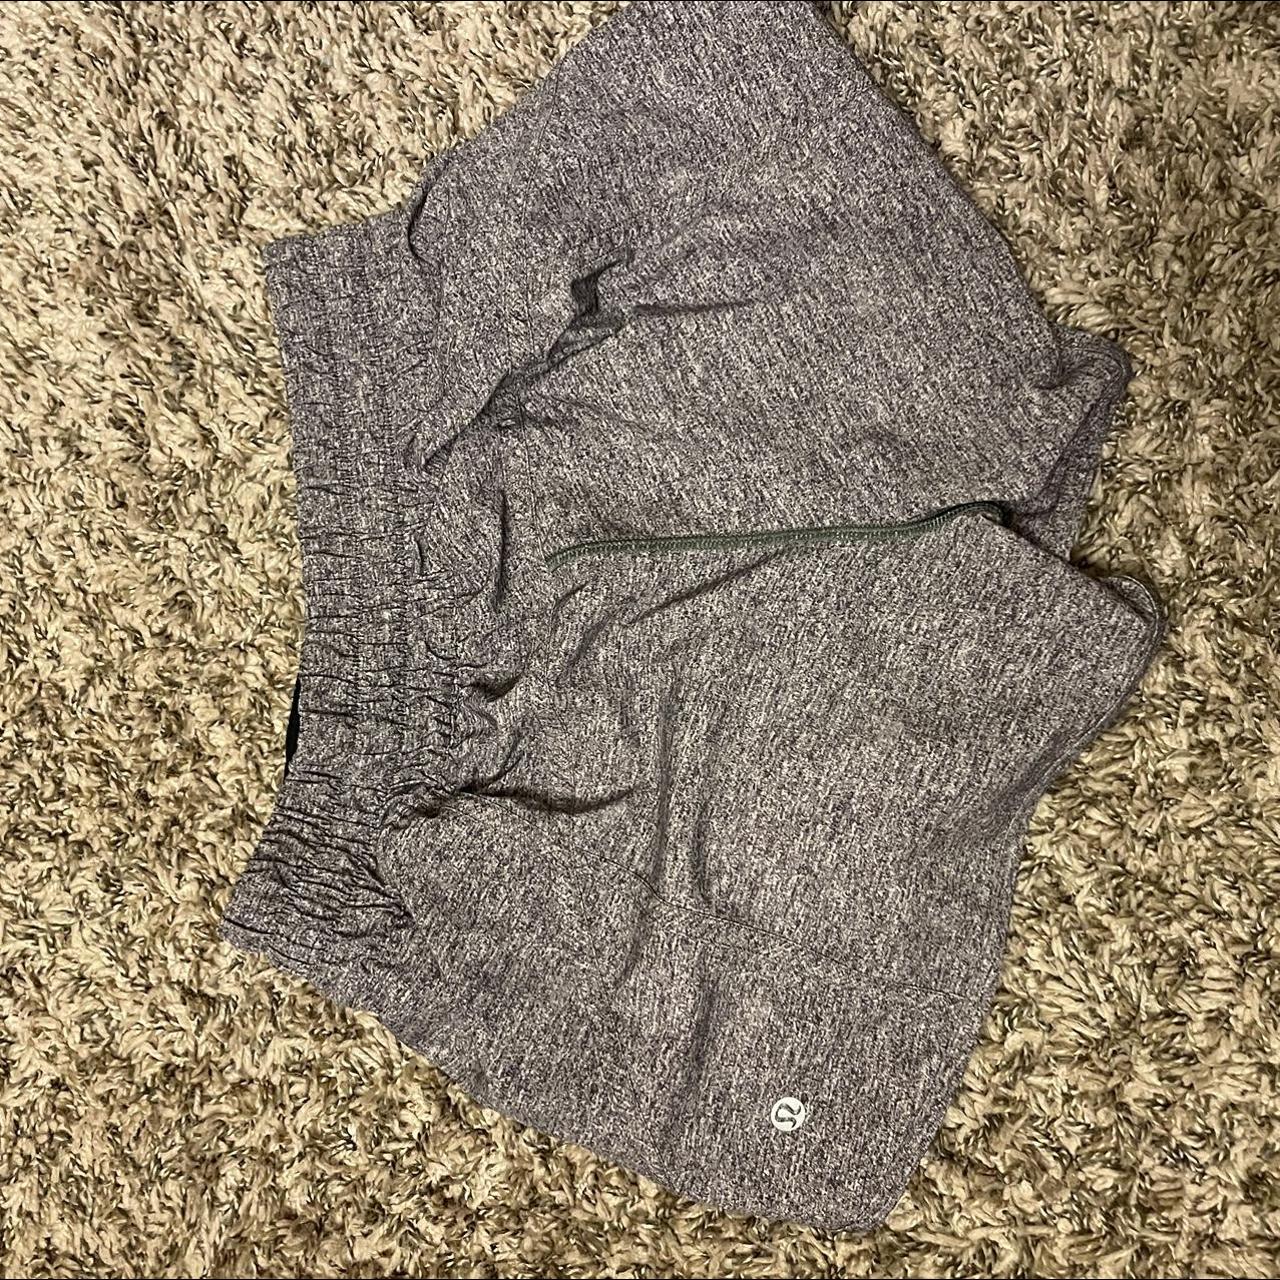 lululemon shorts size 4, worn twice with no signs of